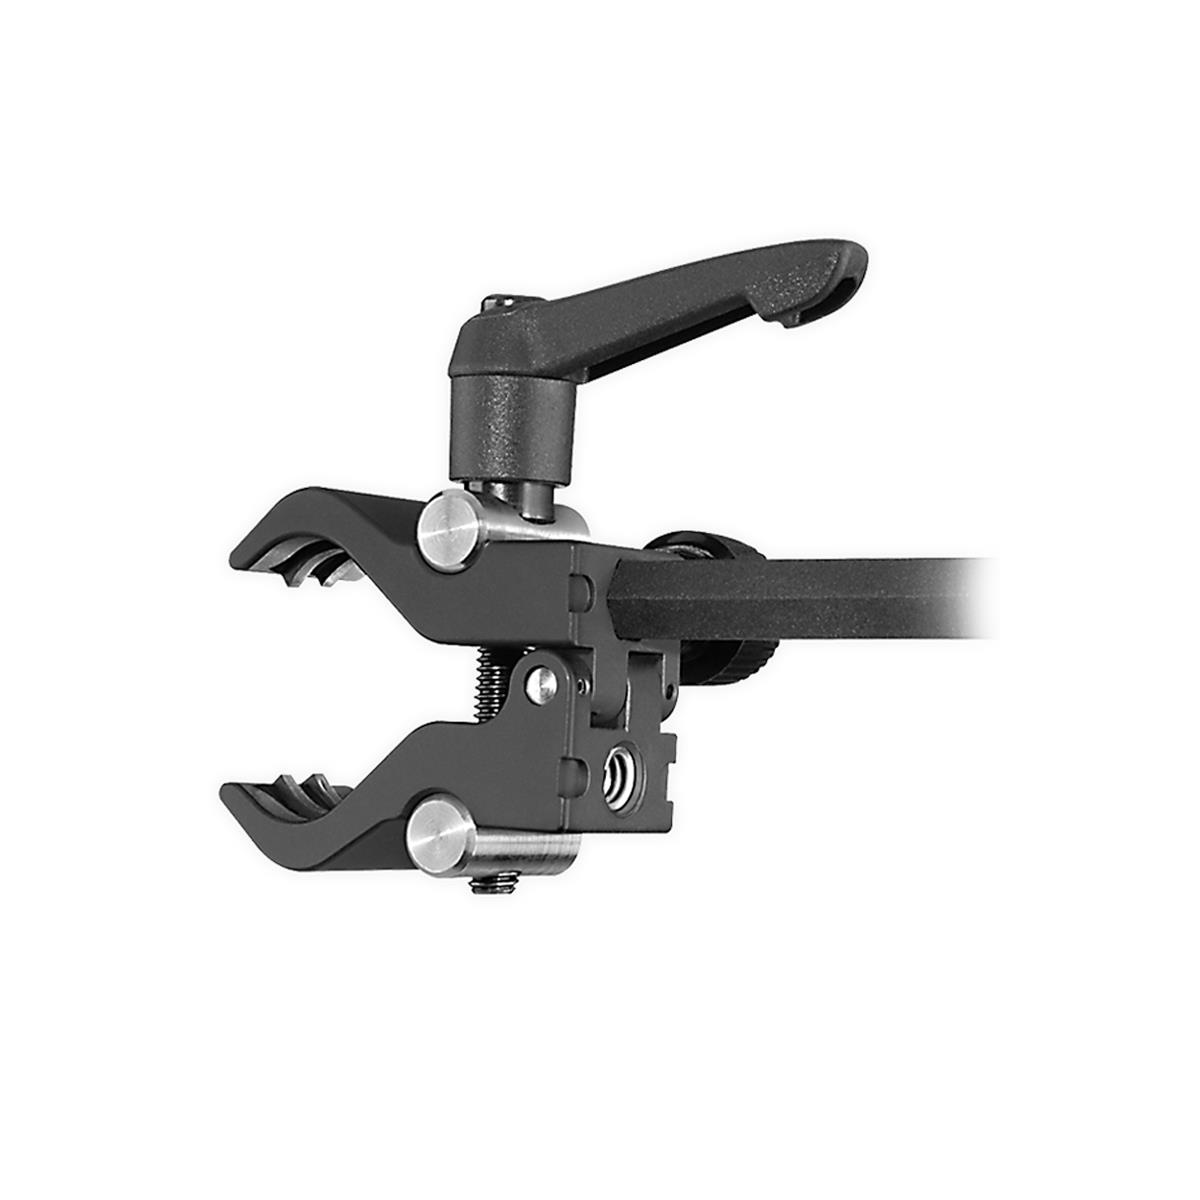 Image of Dedolight CLAMP-C High Precision Clamp